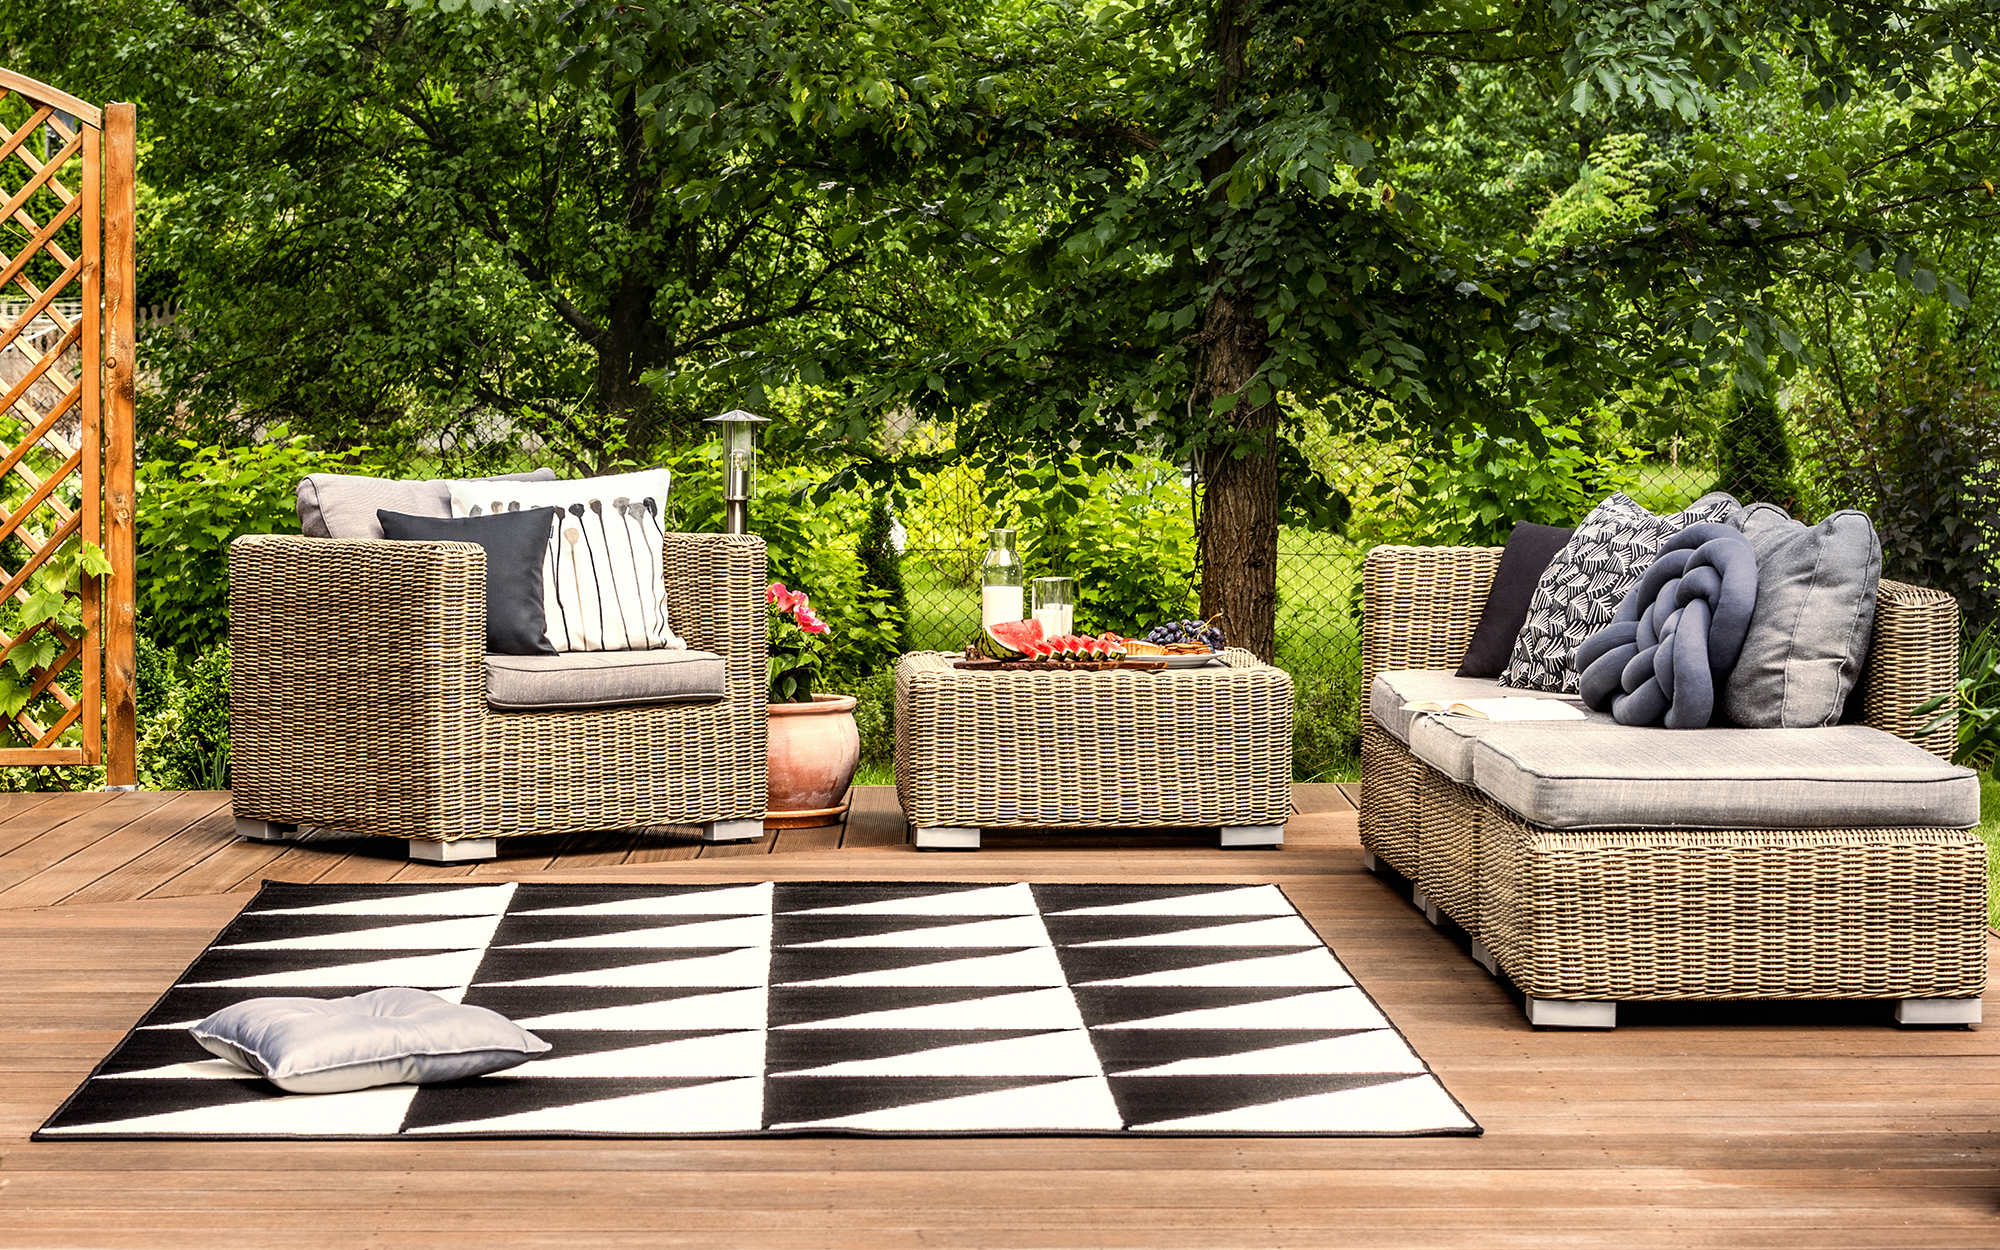 wicker patio on outdoor deck with black and white geometric outdoor rug